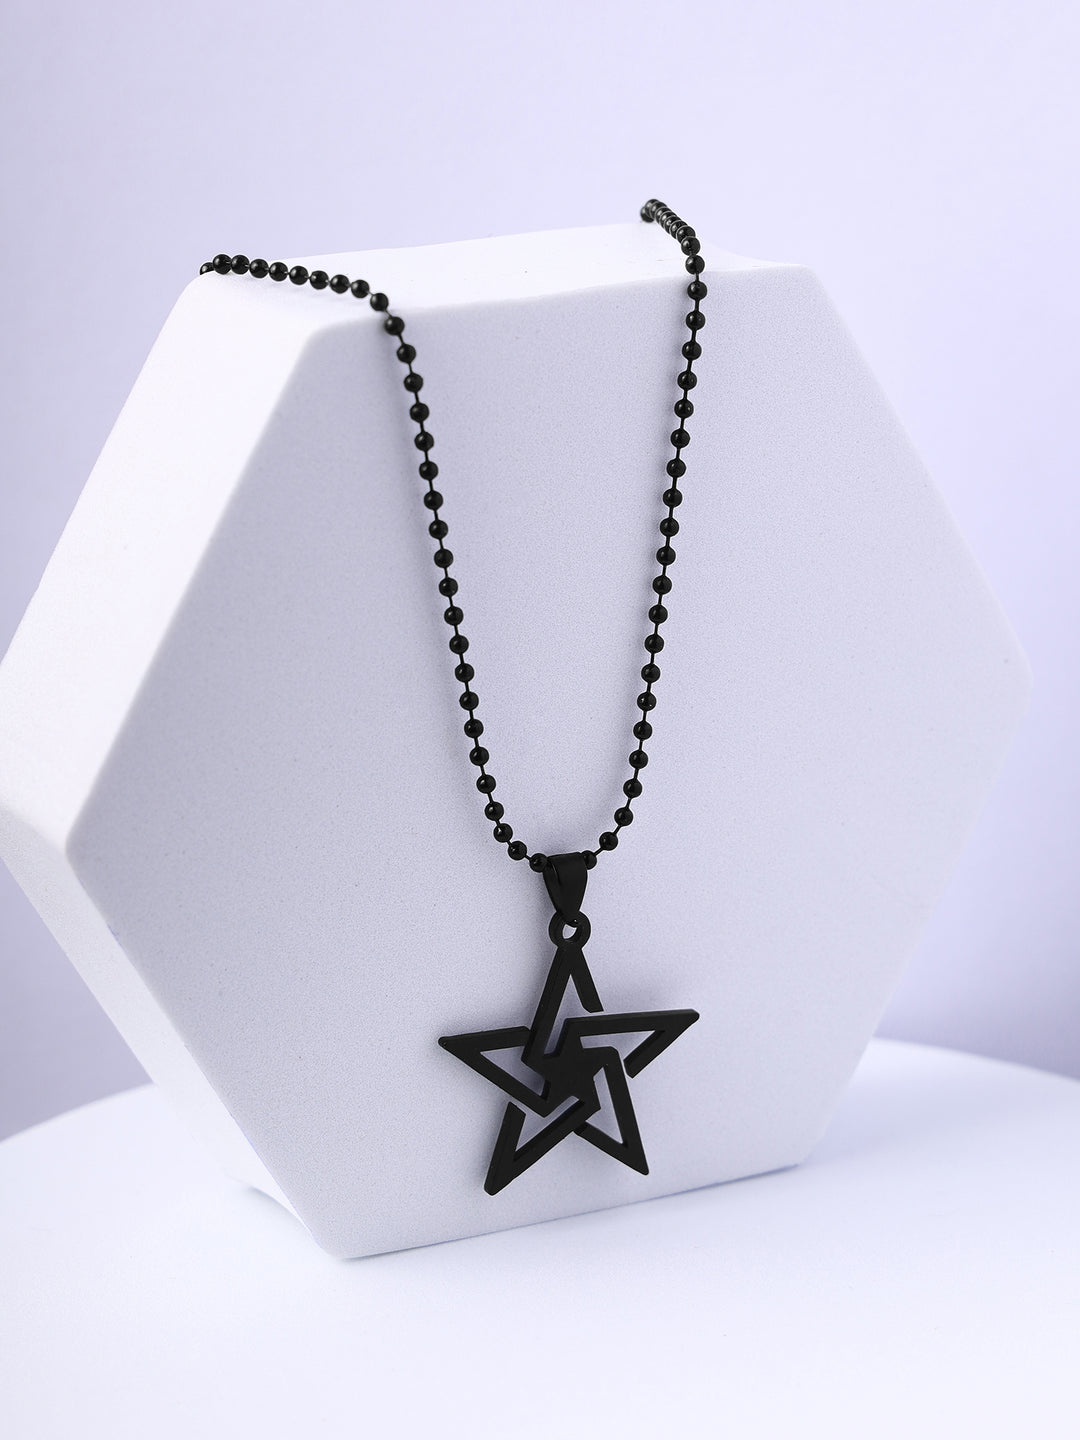 Bold By Priyaasi Men's Black Plated Star Pendant Chain